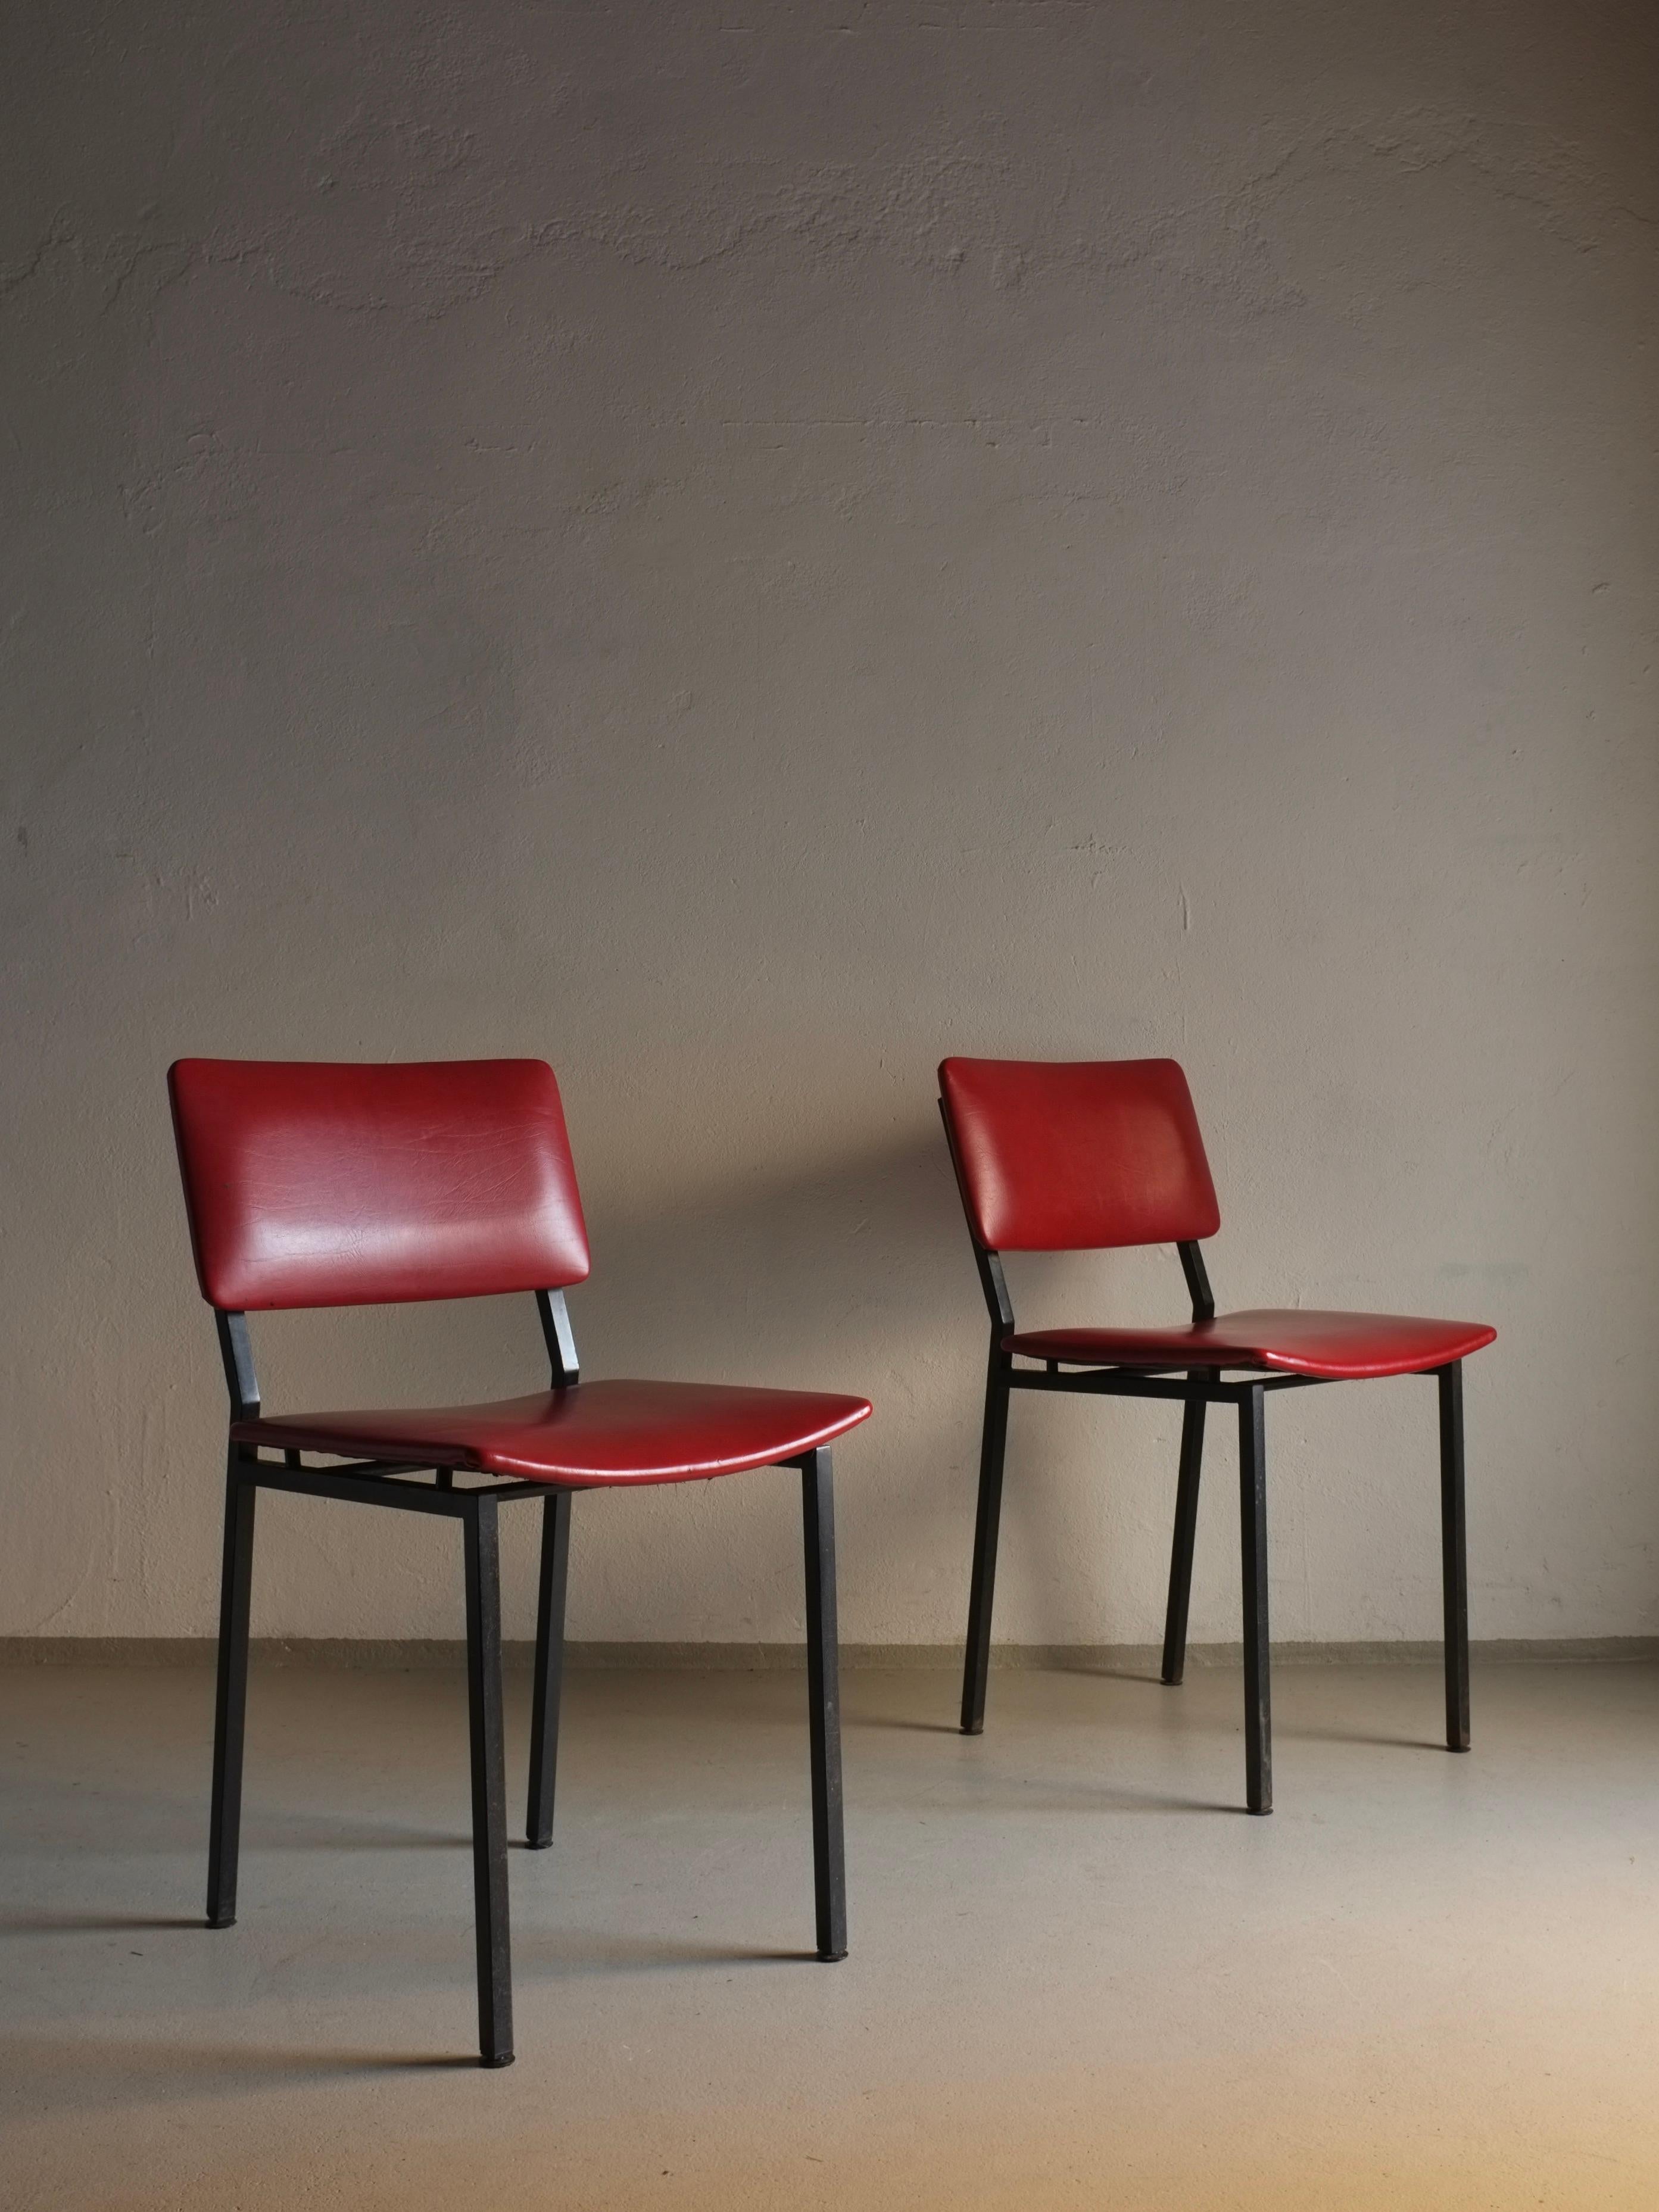 Set of 2 Black Metal Chairs by Gerrit Veenendaal For Kembo, Netherlands 1960s In Good Condition For Sale In Rīga, LV